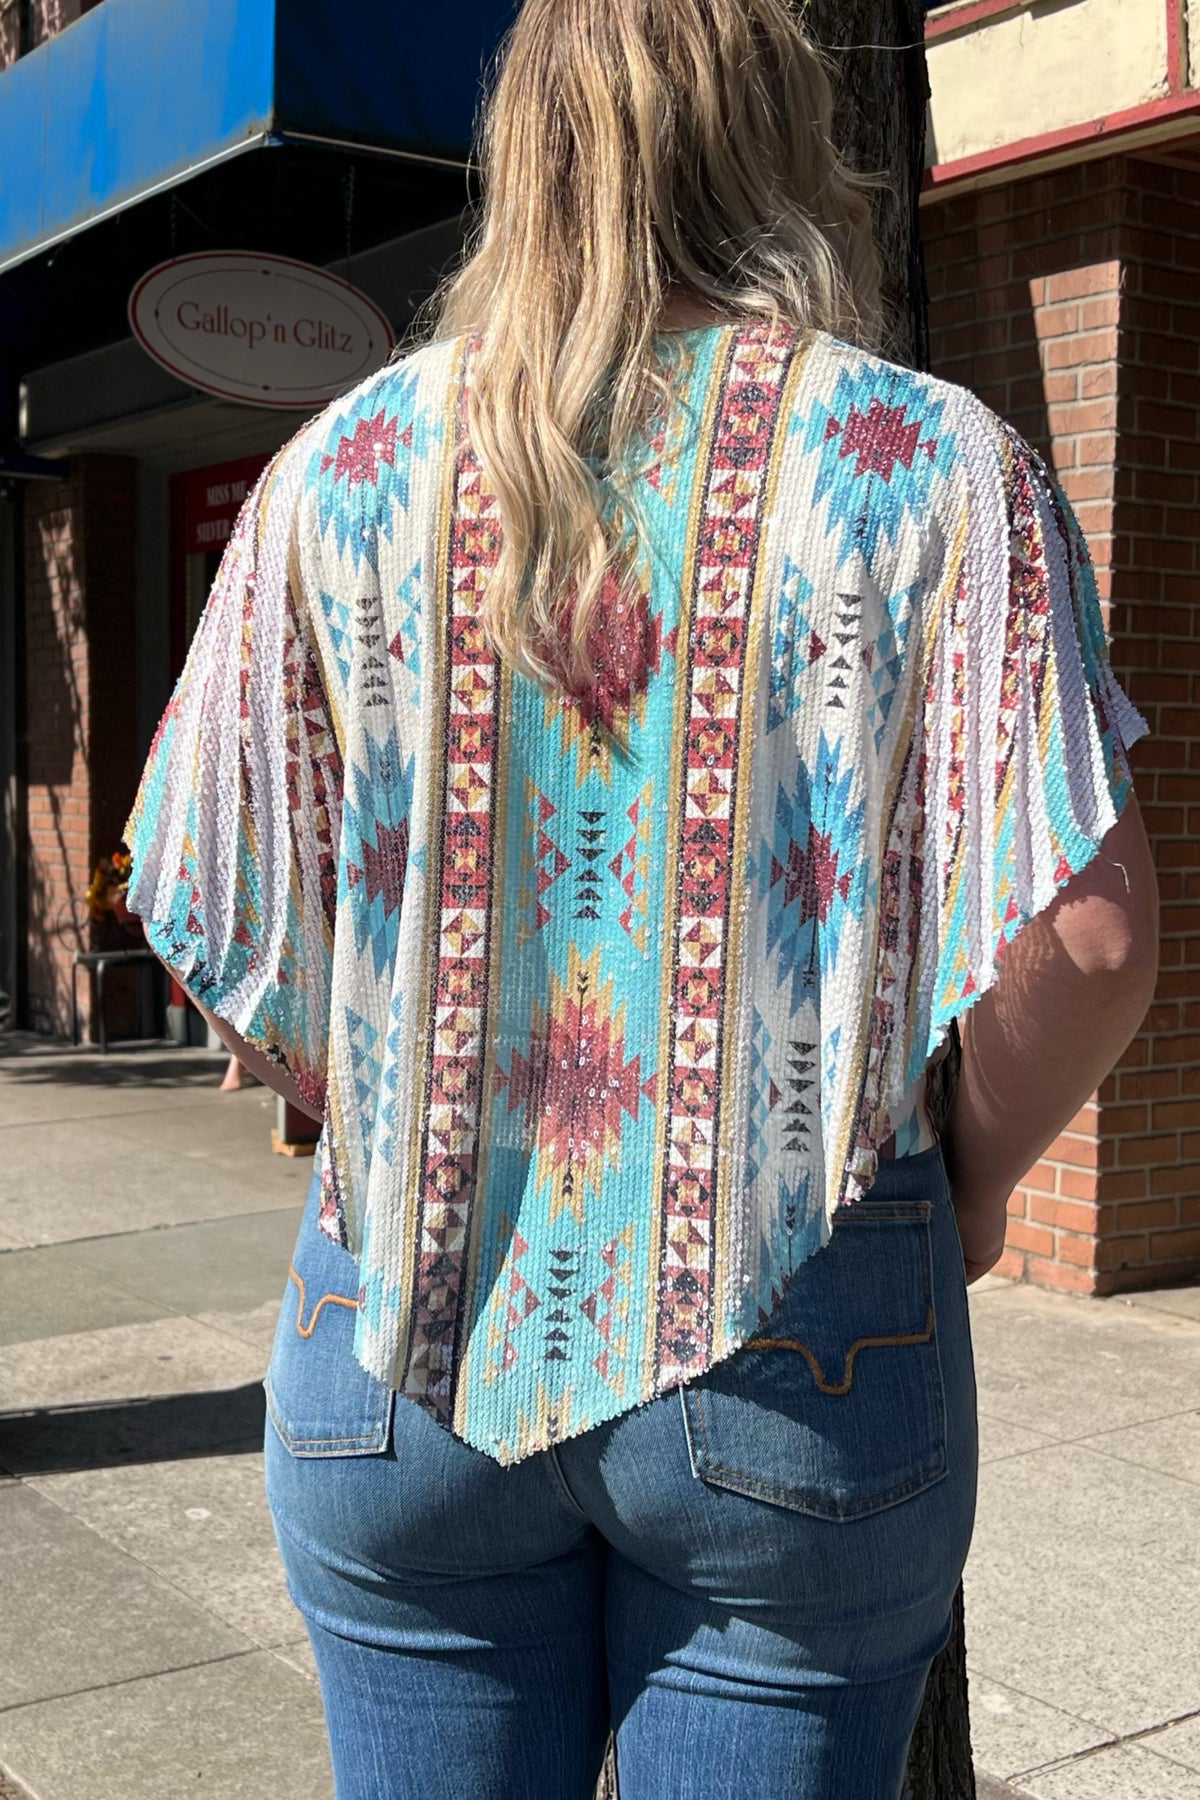 Origami Turquoise Sequin Aztec Print Top-Origami-Gallop 'n Glitz- Women's Western Wear Boutique, Located in Grants Pass, Oregon